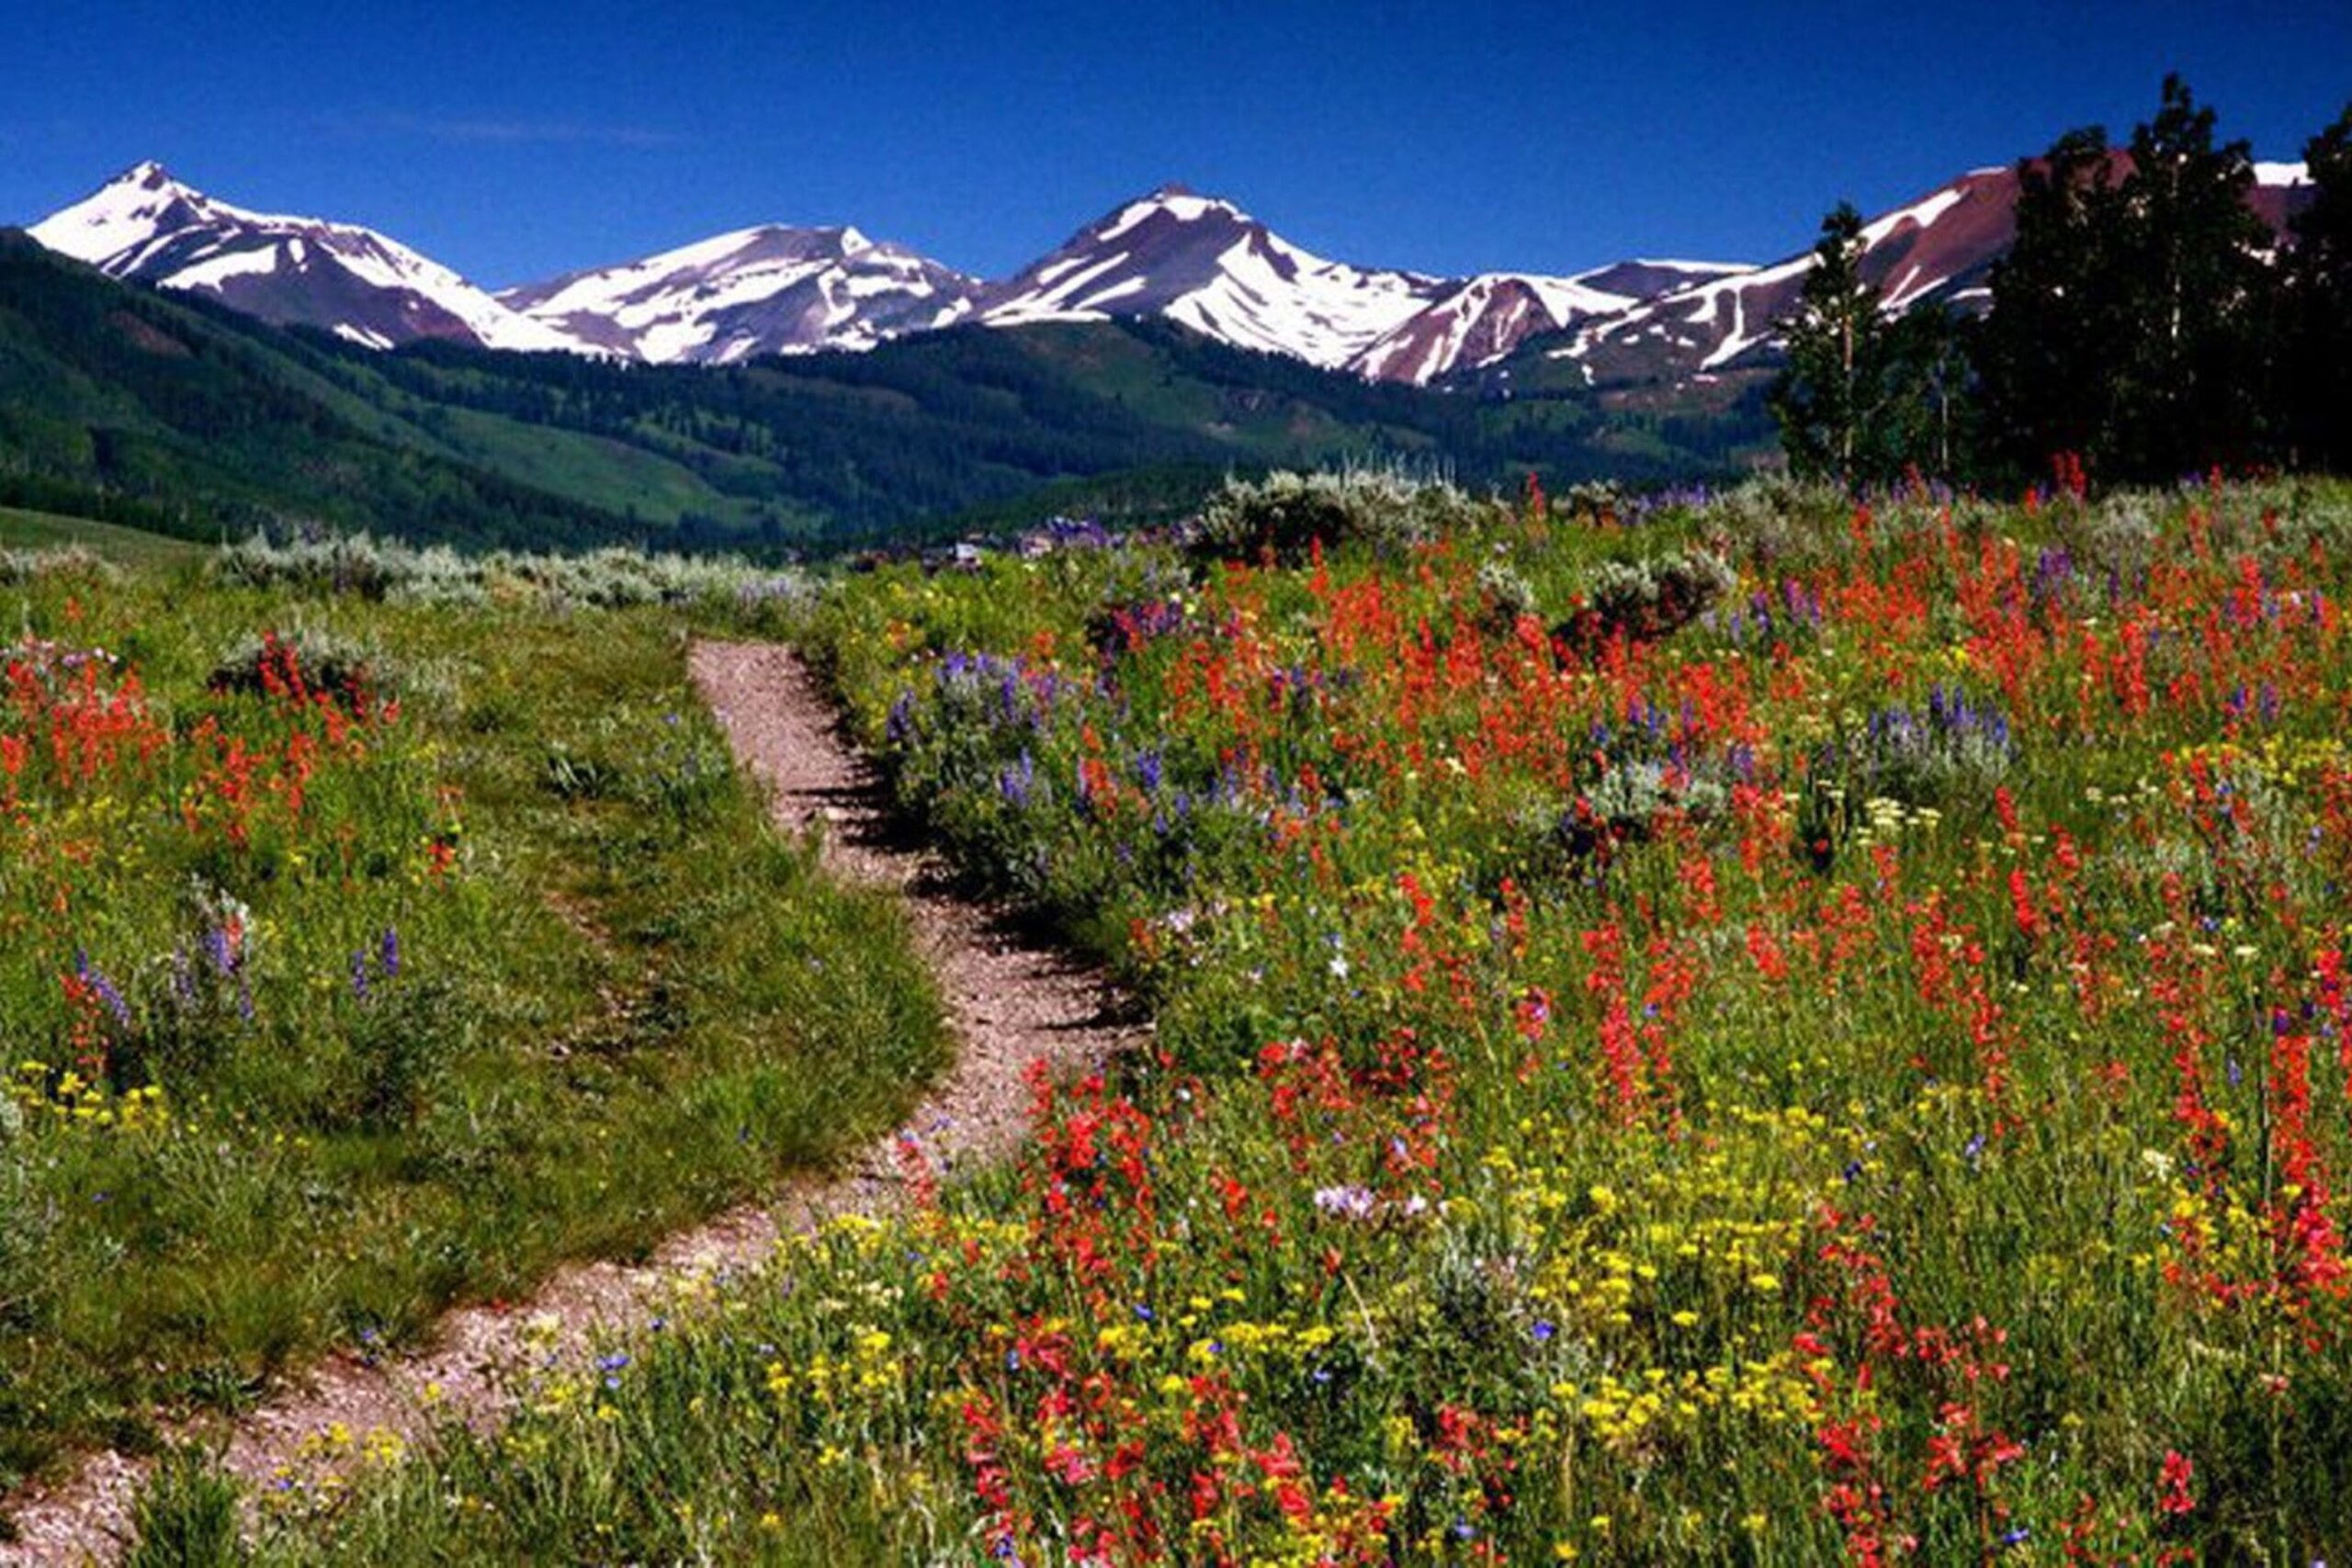 shot of a dirt hiking trail with wildflowers and snow-capped mountains in the background